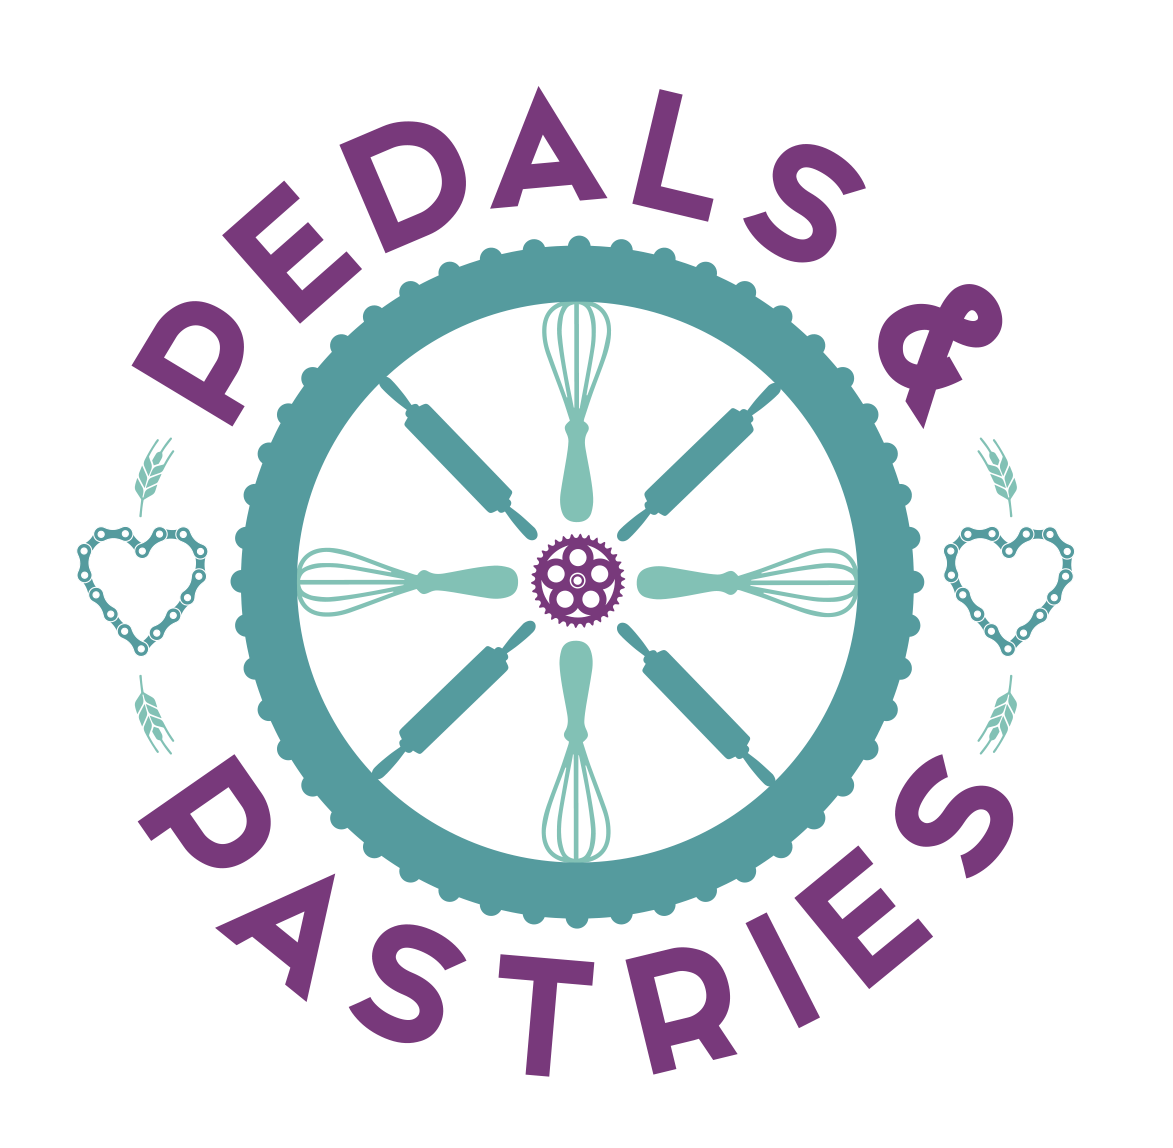 Pedals and Pastries